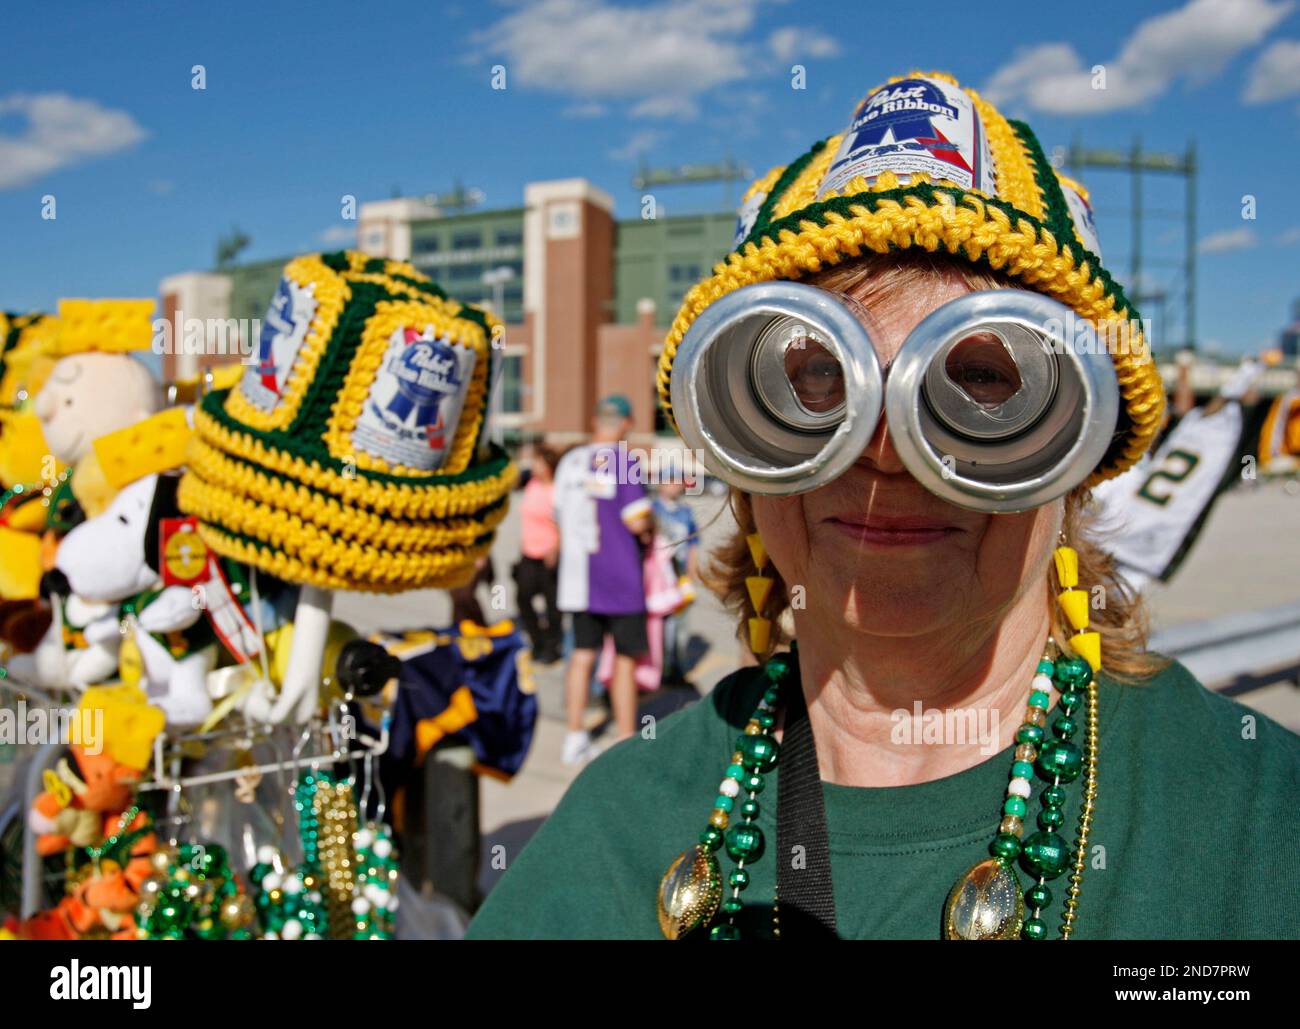 Sharon Meyer models some beer goggles that she is selling outside Lambeau  Field before an NFL preseason football game between the Green Bay Packers  and the Indianapolis Colts Thursday, Aug. 26, 2010,